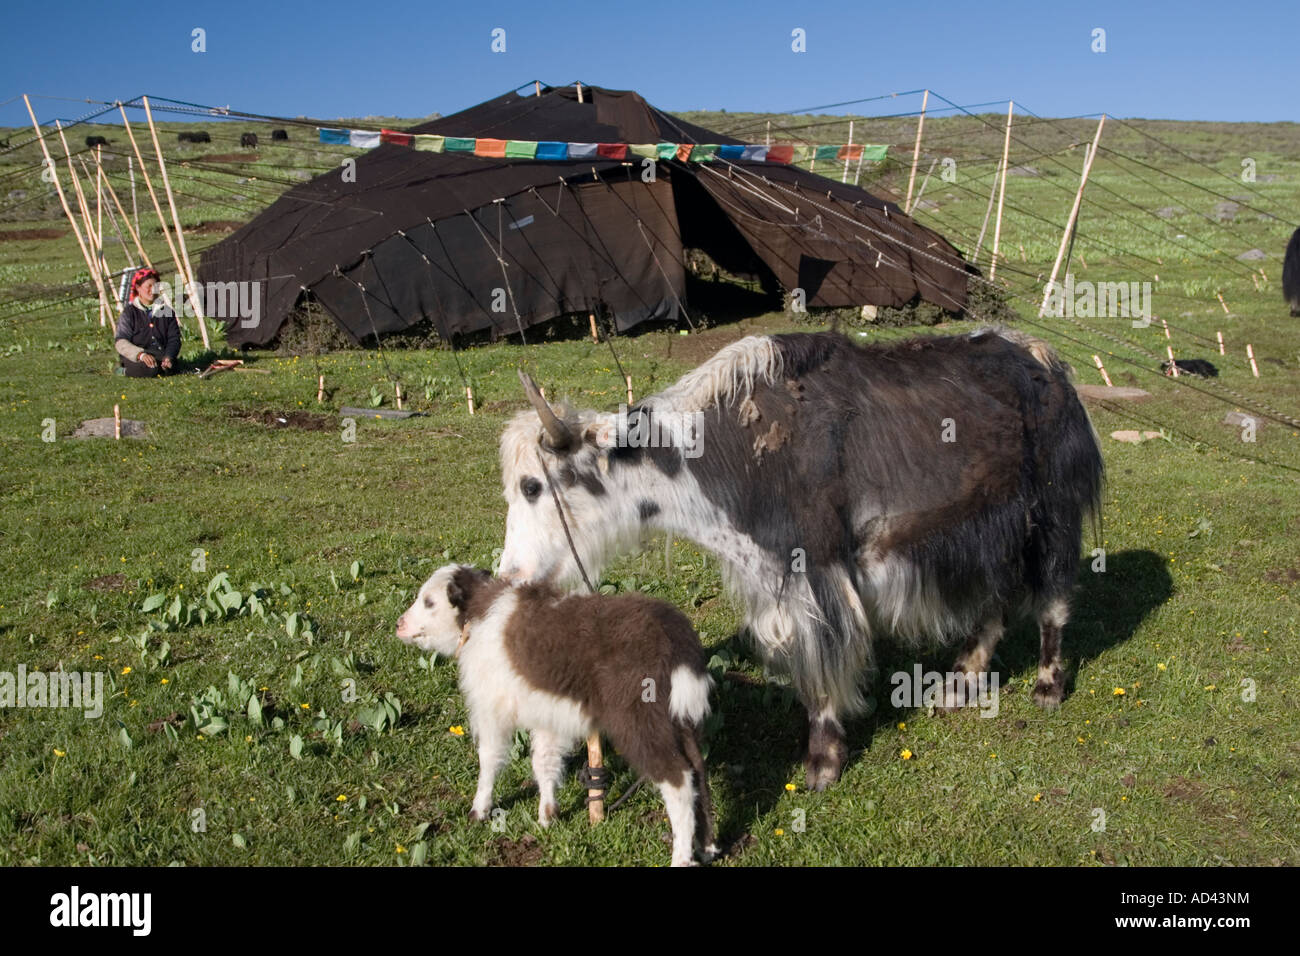 A yak cow and her calf outside a nomads' tent at the Tagong grasslands,  Sichuan province, China Stock Photo - Alamy